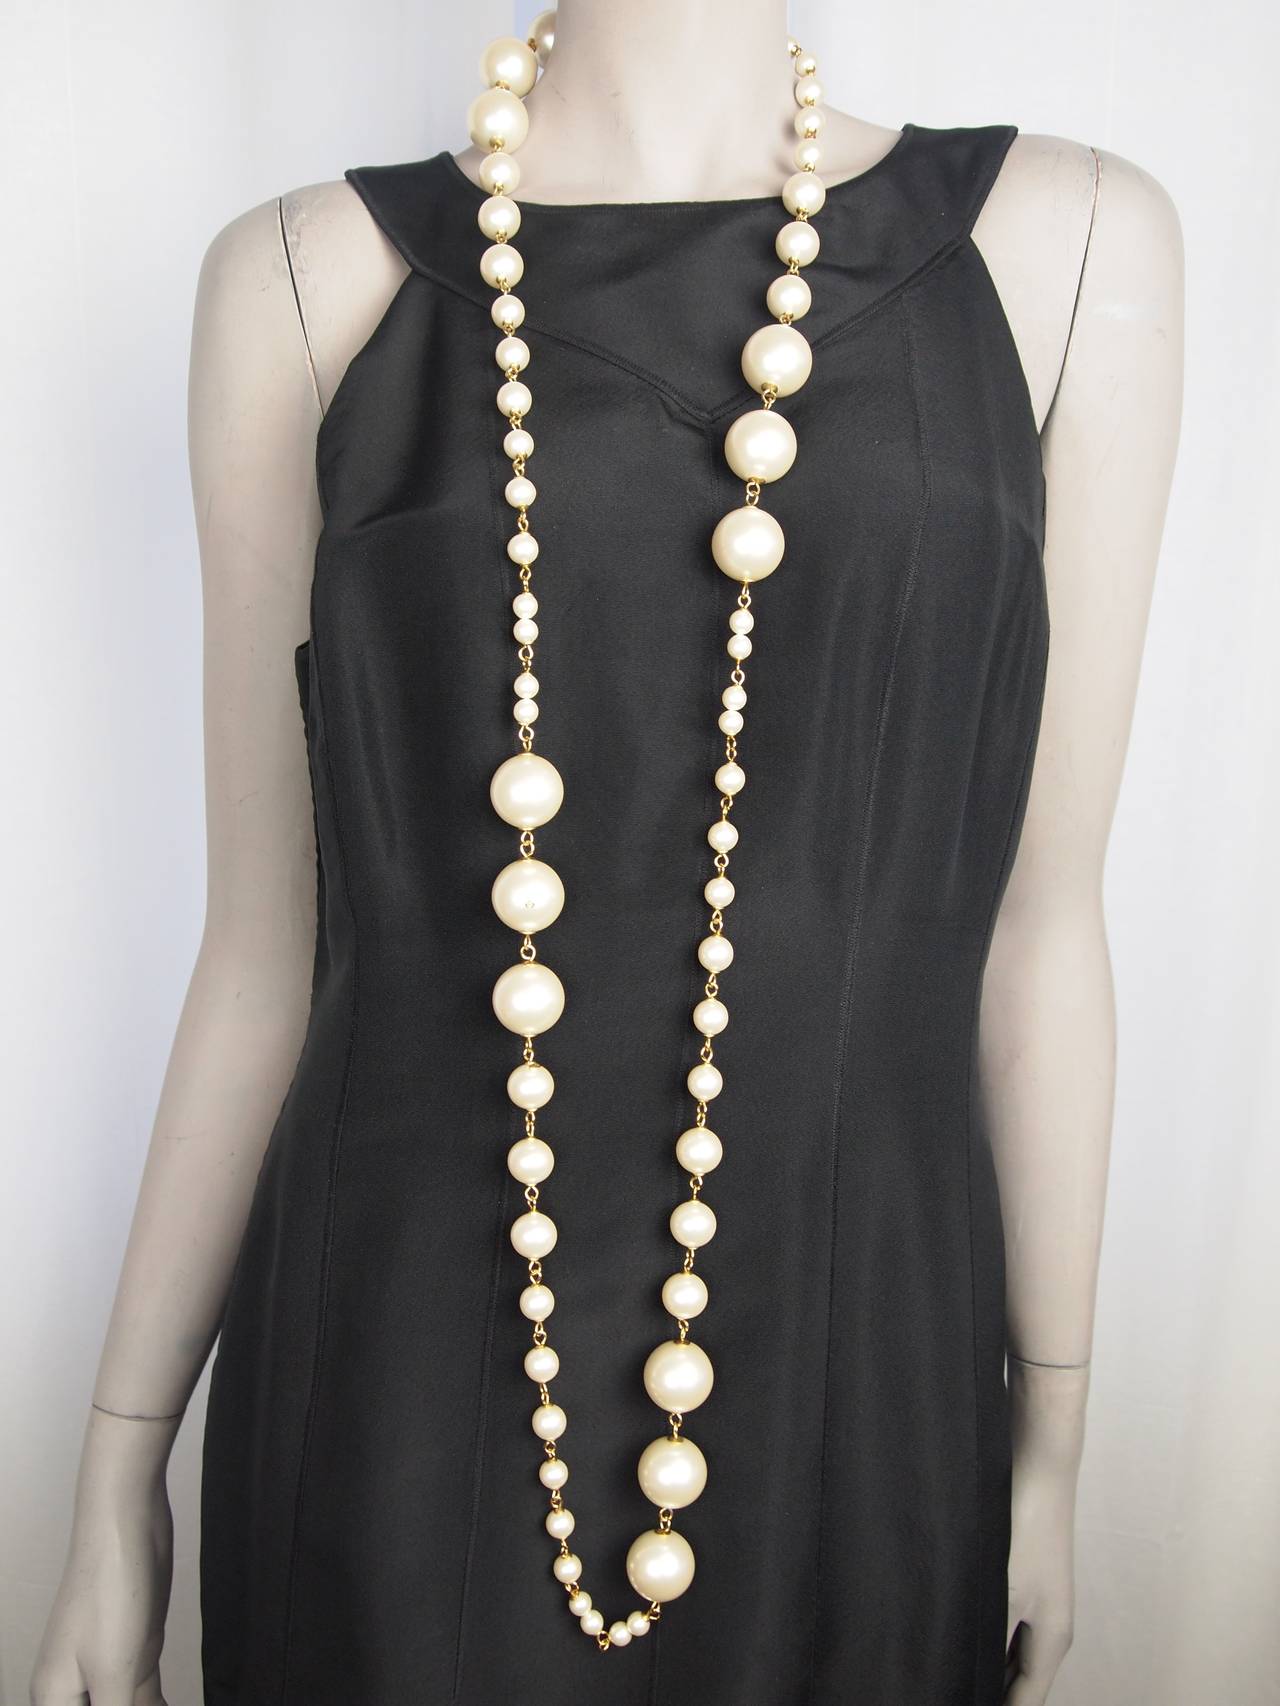 Chanel Long Pearl Necklace Autumn/Winter 2001-2002 In Excellent Condition For Sale In Cincinnati, OH